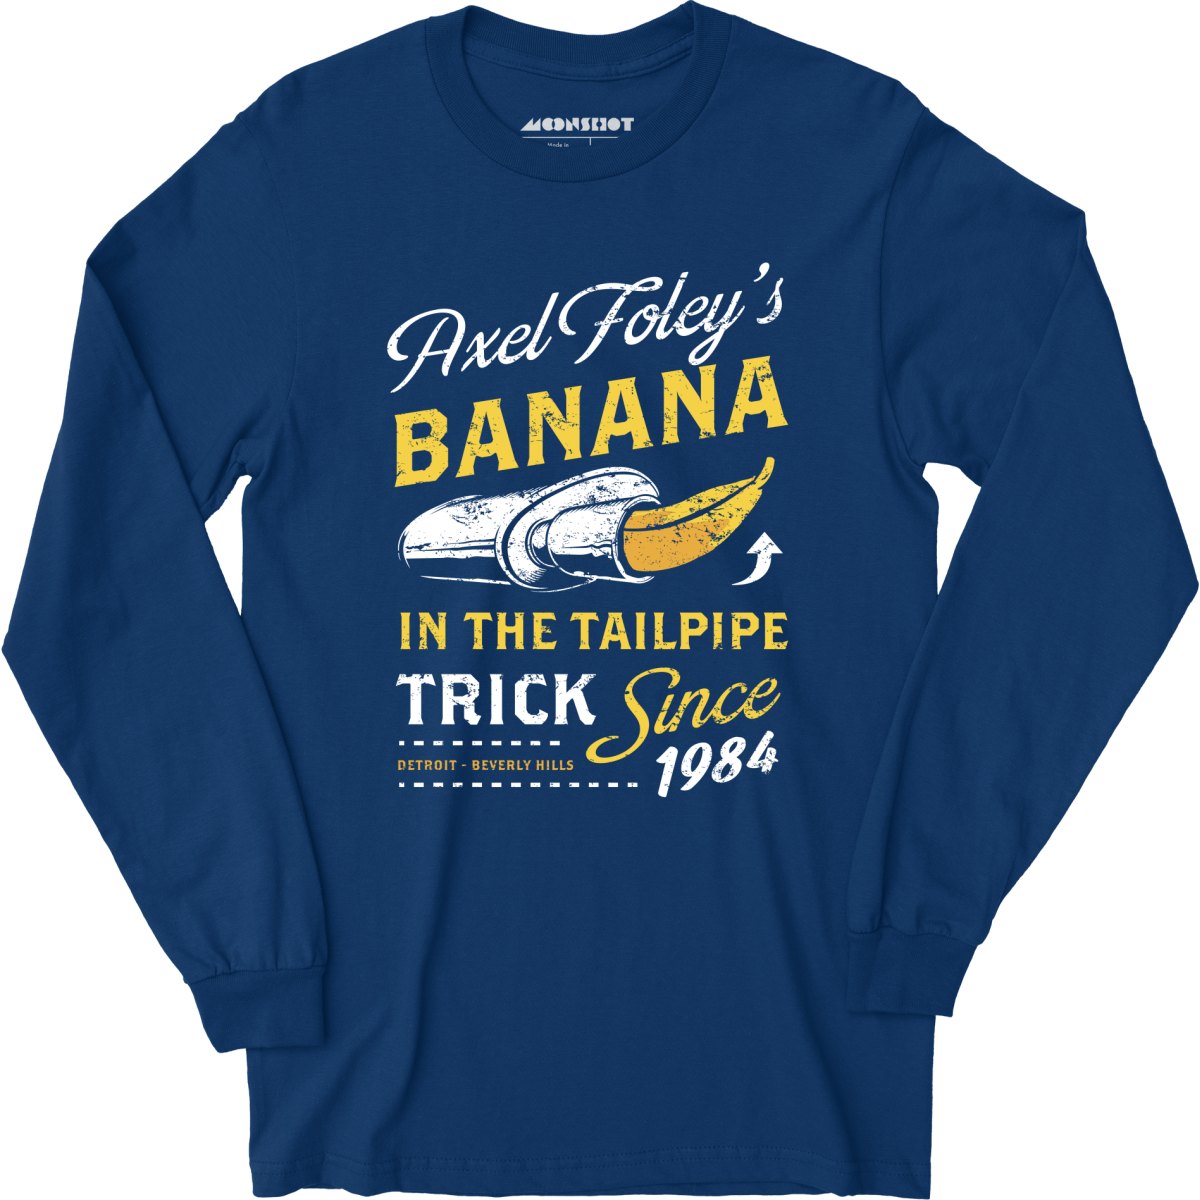 Axel Foley's Banana in the Tailpipe Trick - Long Sleeve T-Shirt